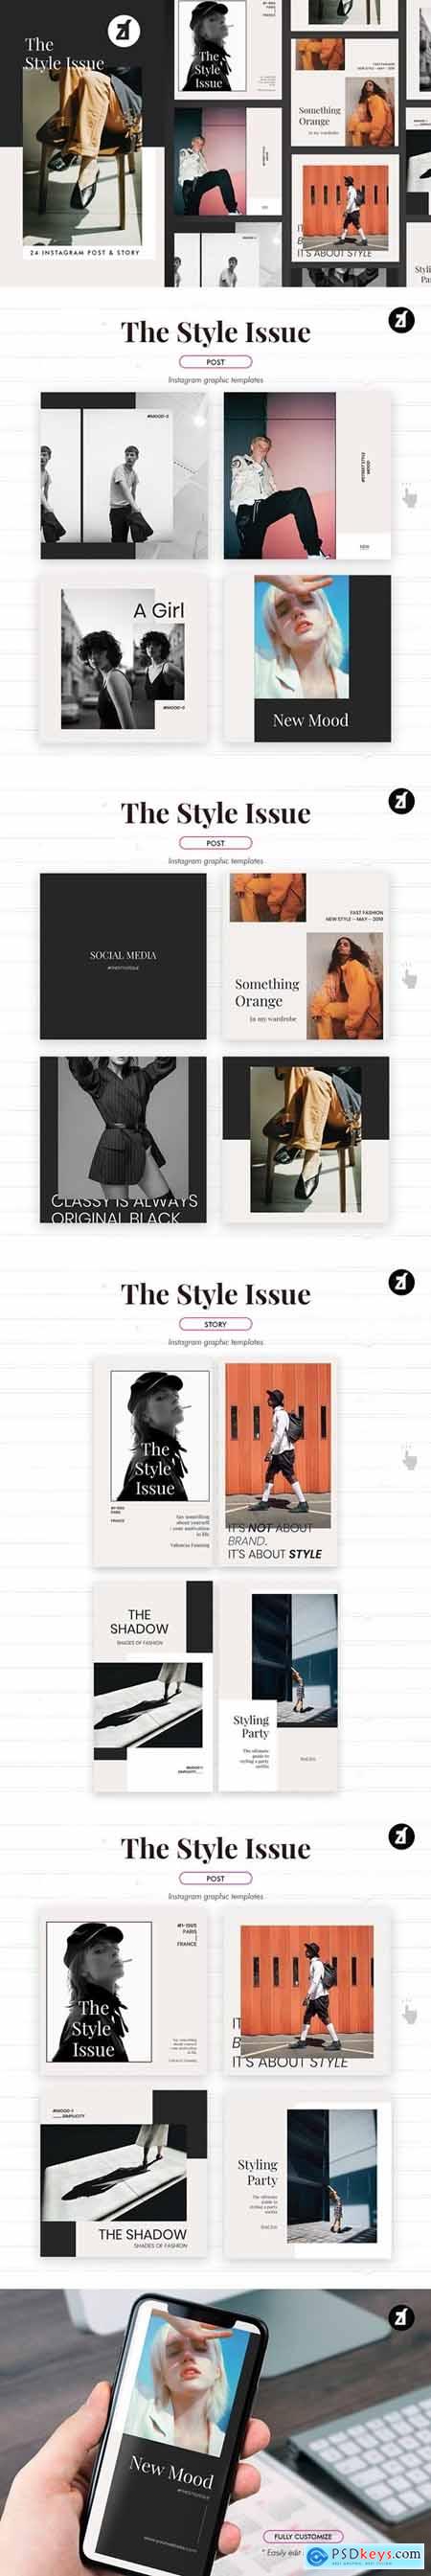 The style issue social media graphic templates